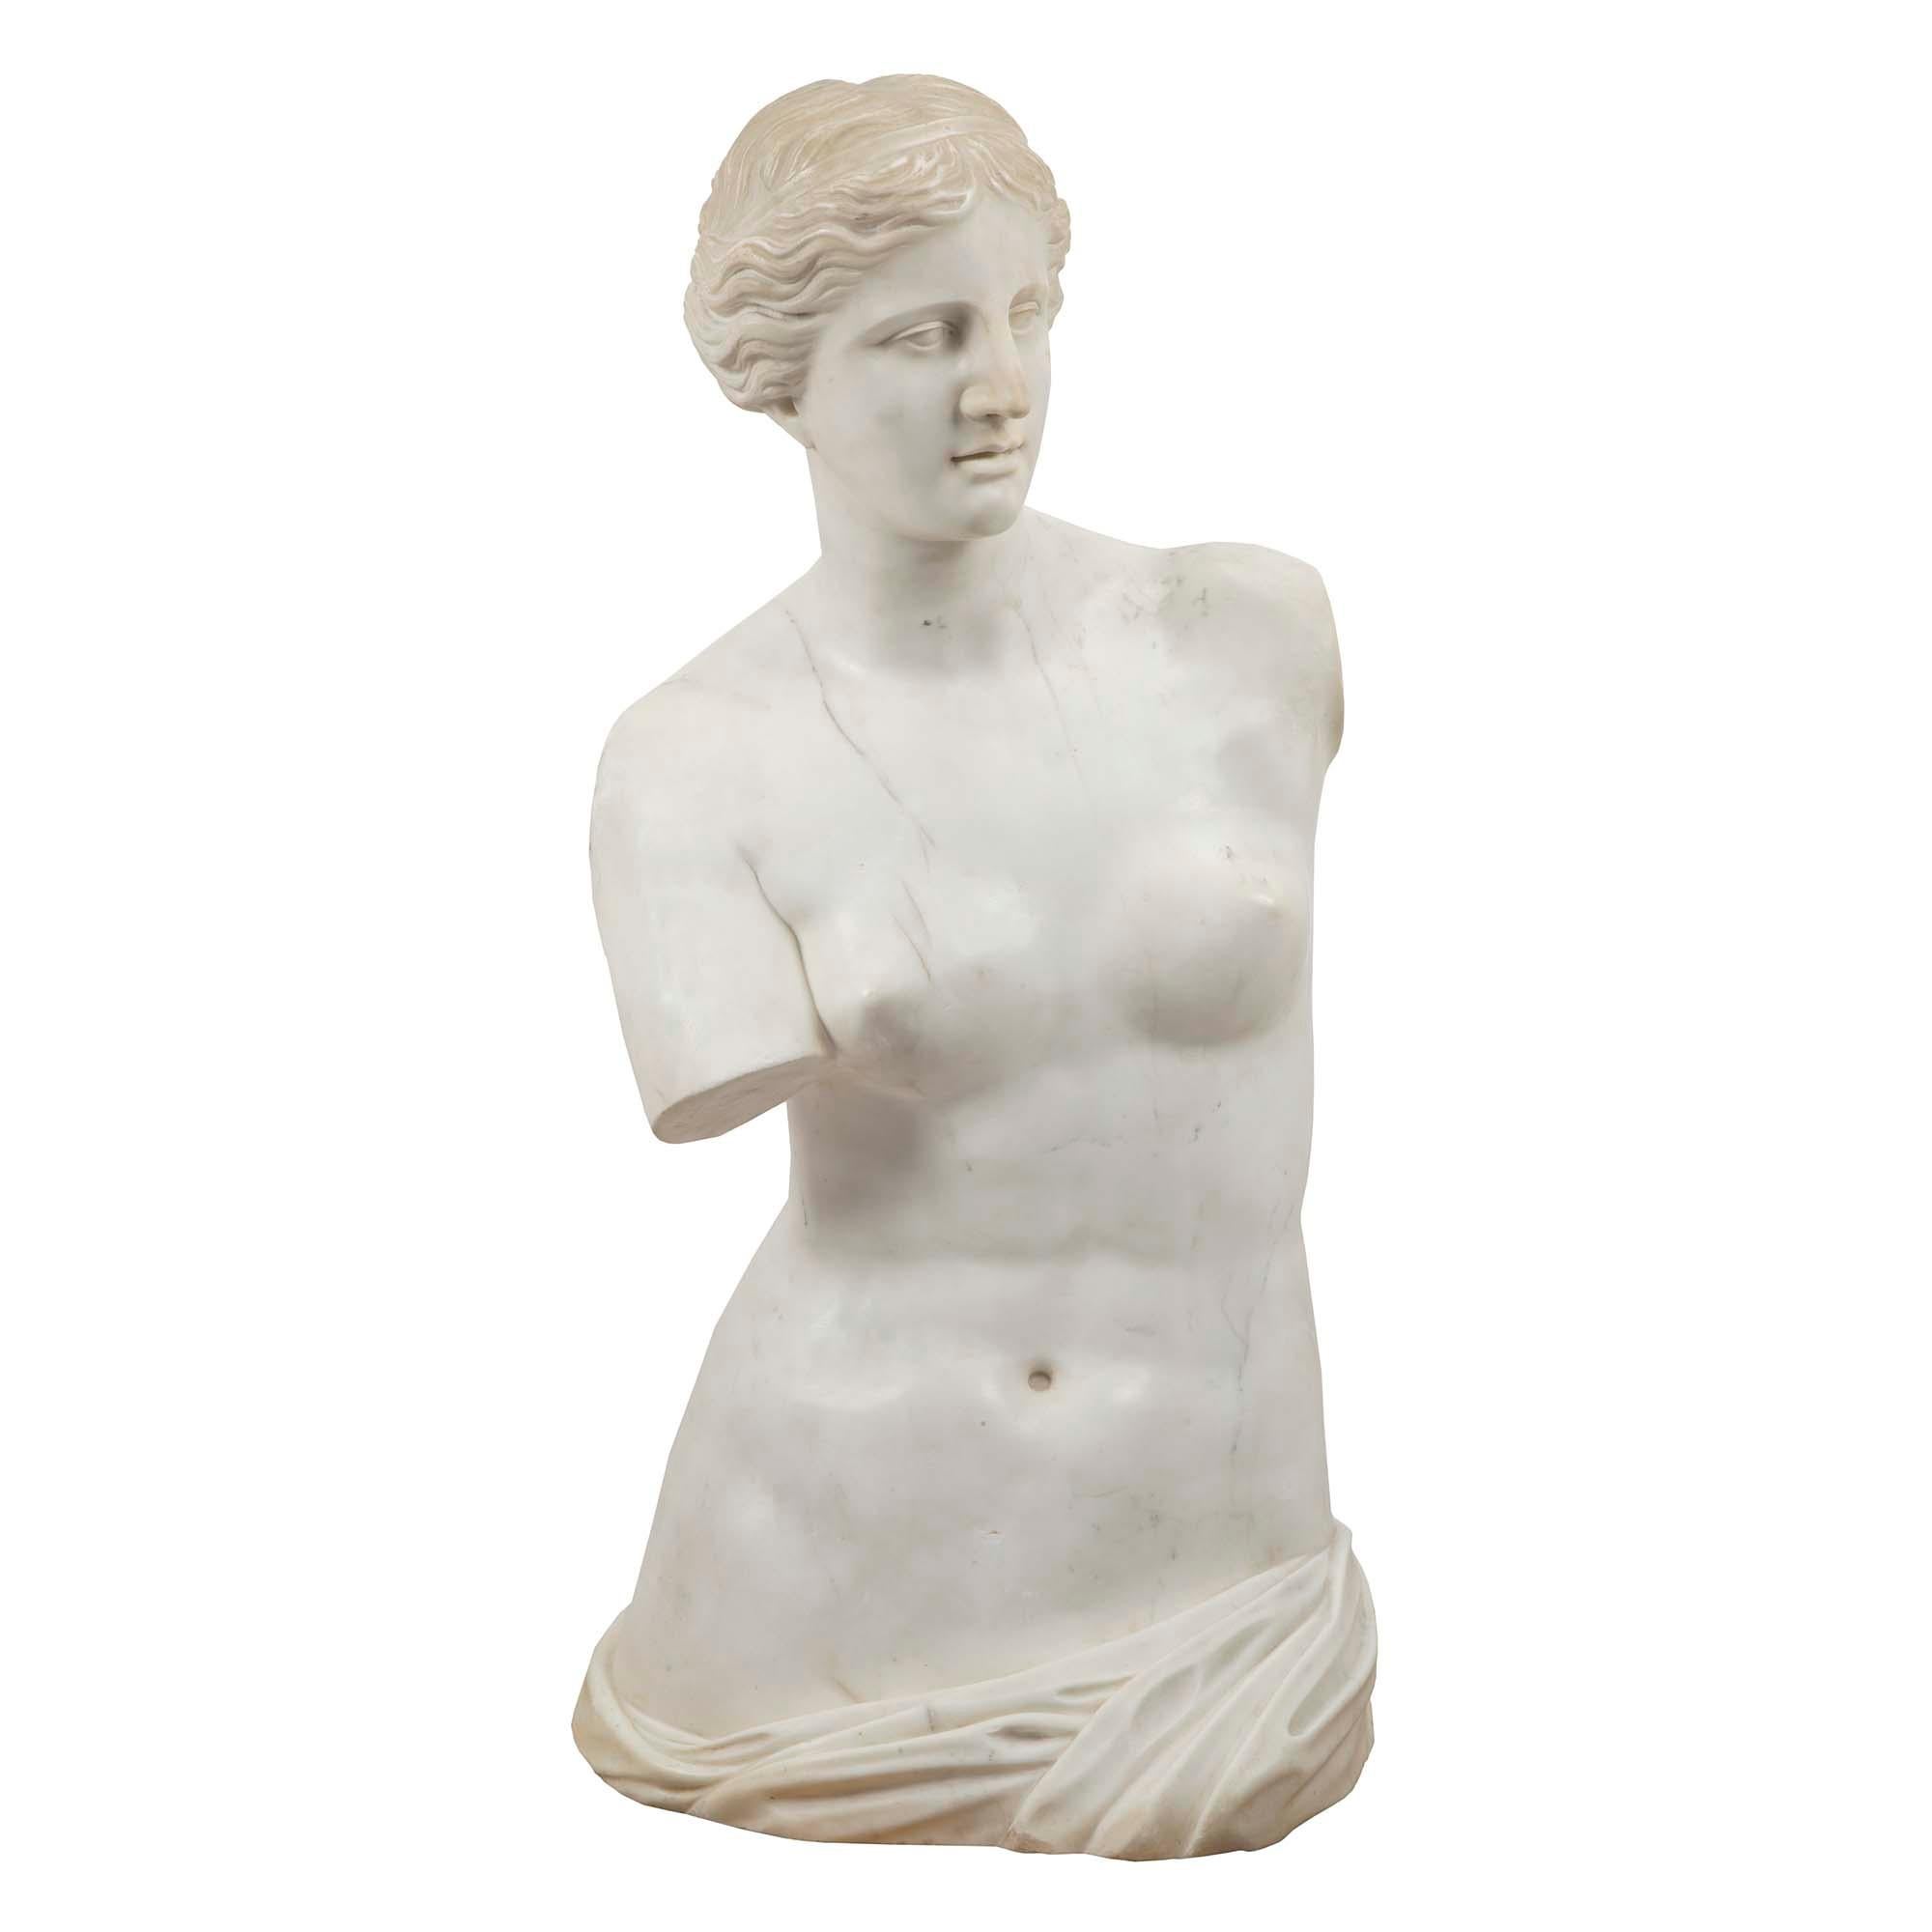 A stunning and large scale Italian 19th century white Carrara marble of Venus de Milo. She is wonderfully sculpted with striking proportions and attention to detail. Venus de Milo is an ancient Greek statue created between 130 and 100 BC and